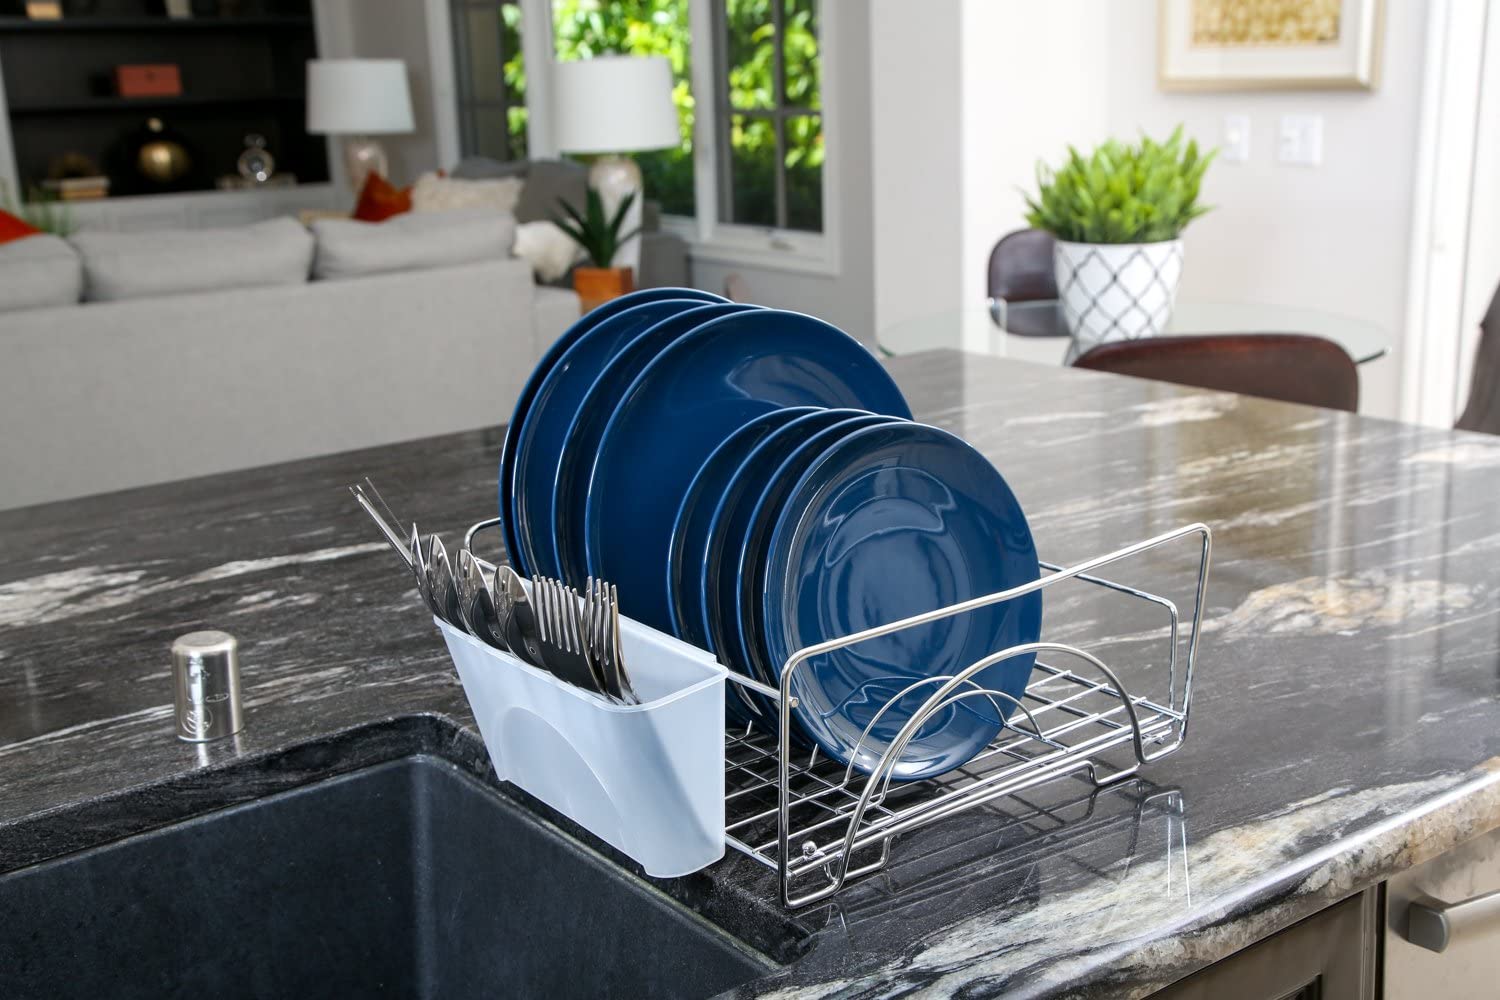 Expandable Dish Drainer with Adjustable Arms | Smart Design Kitchen